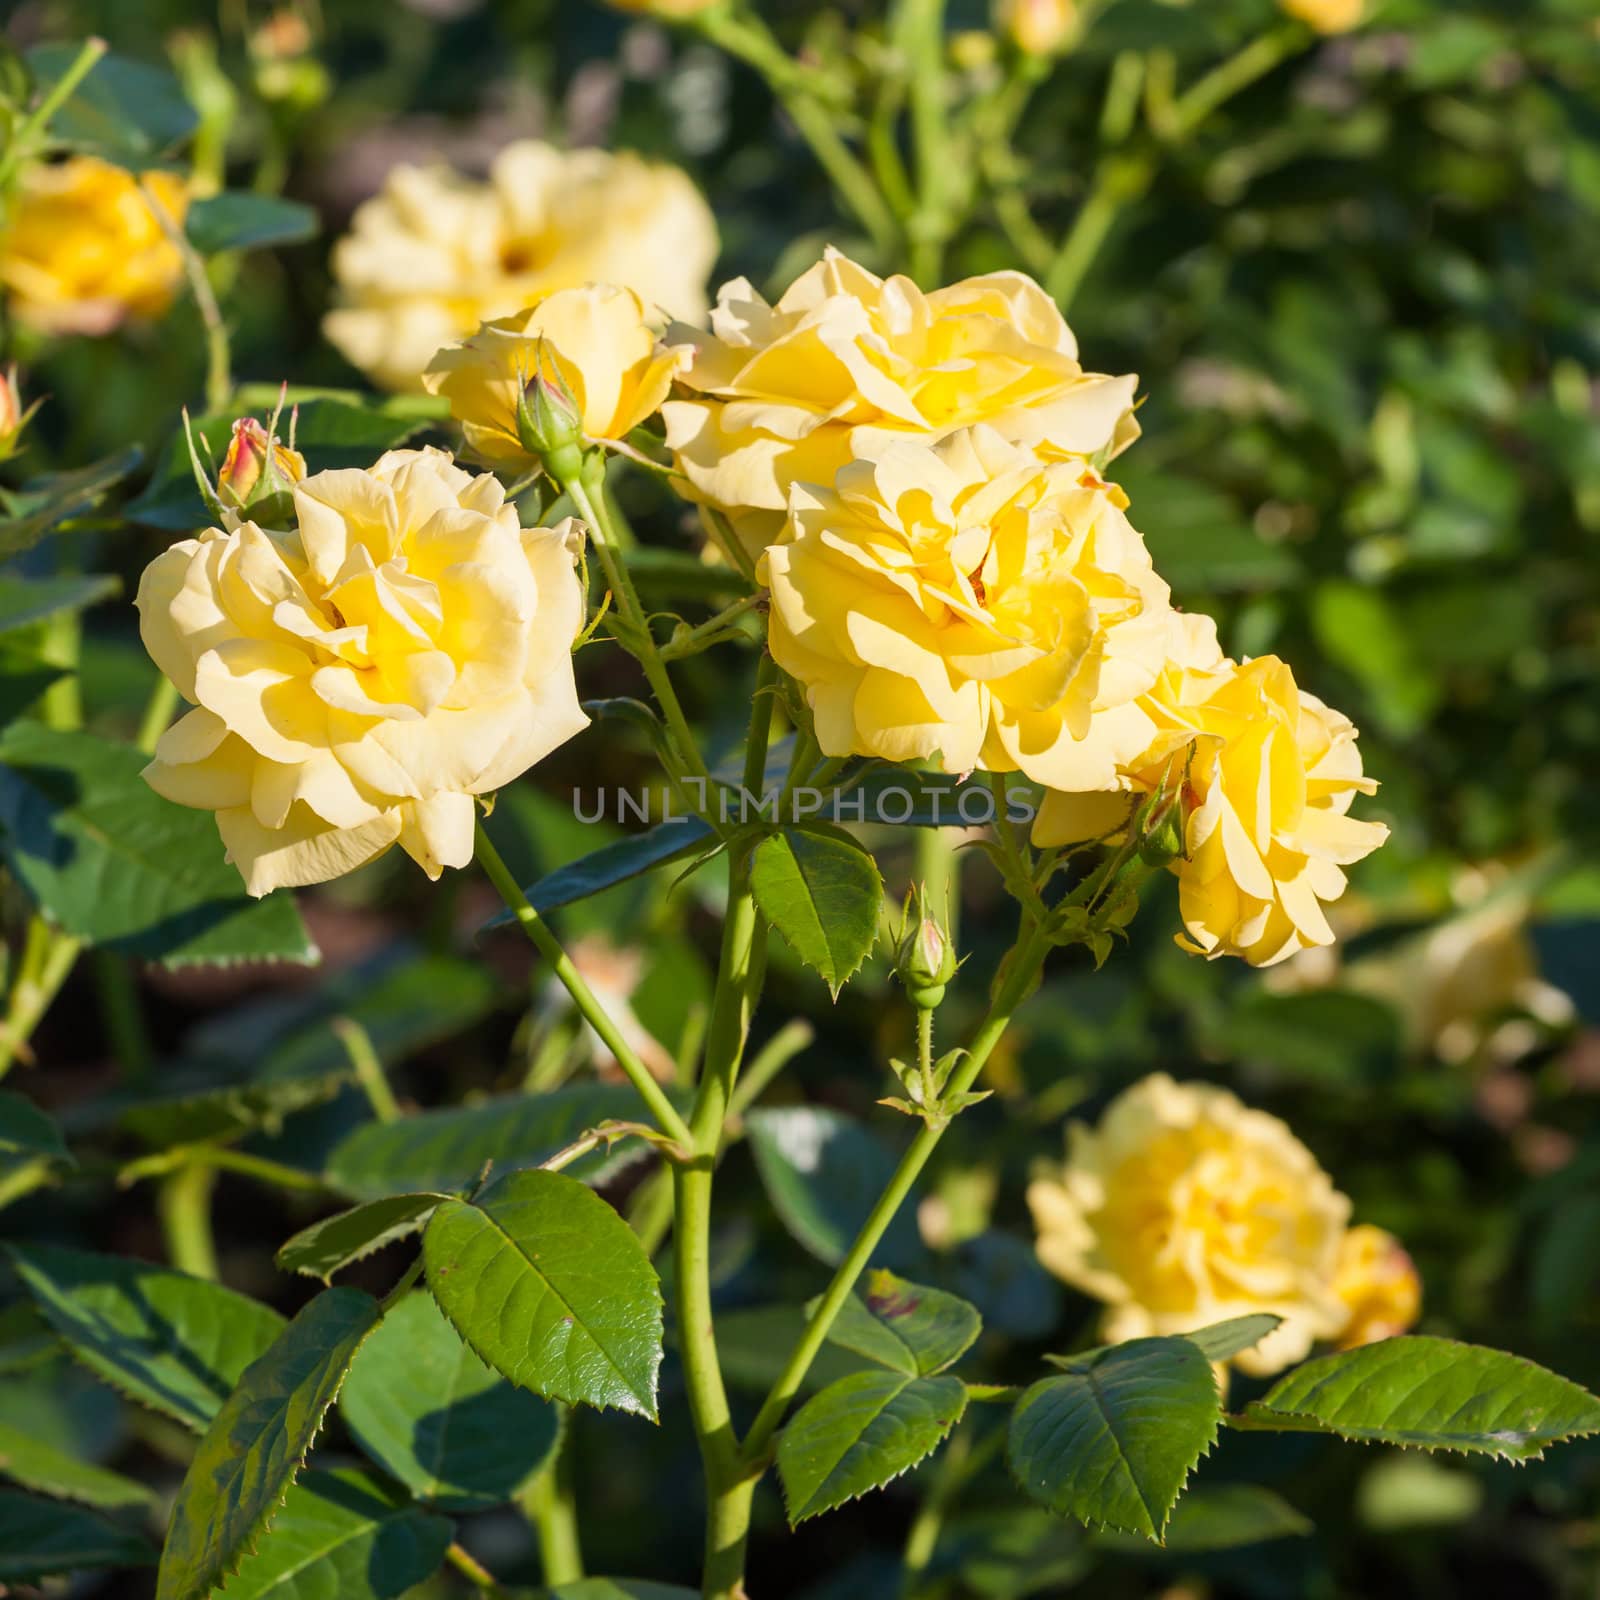 Yellow roses in the Garden  by RTsubin